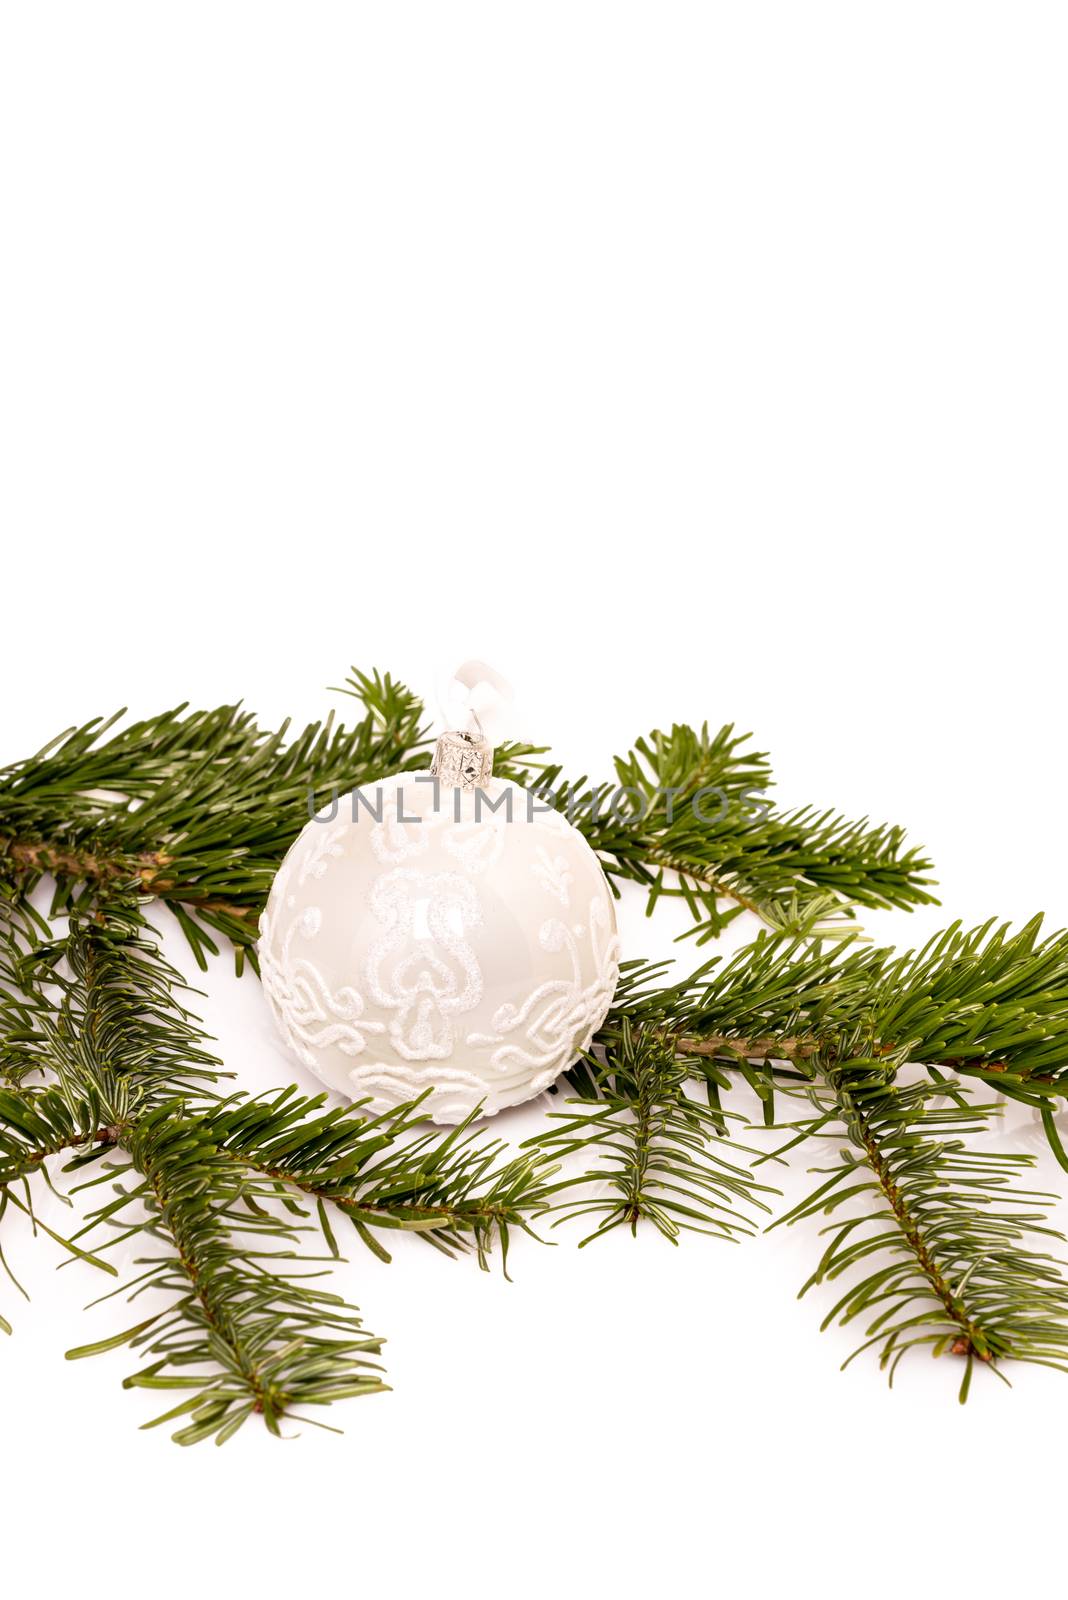 Closeup of Christmas ball and fir branch on white background with space for your text